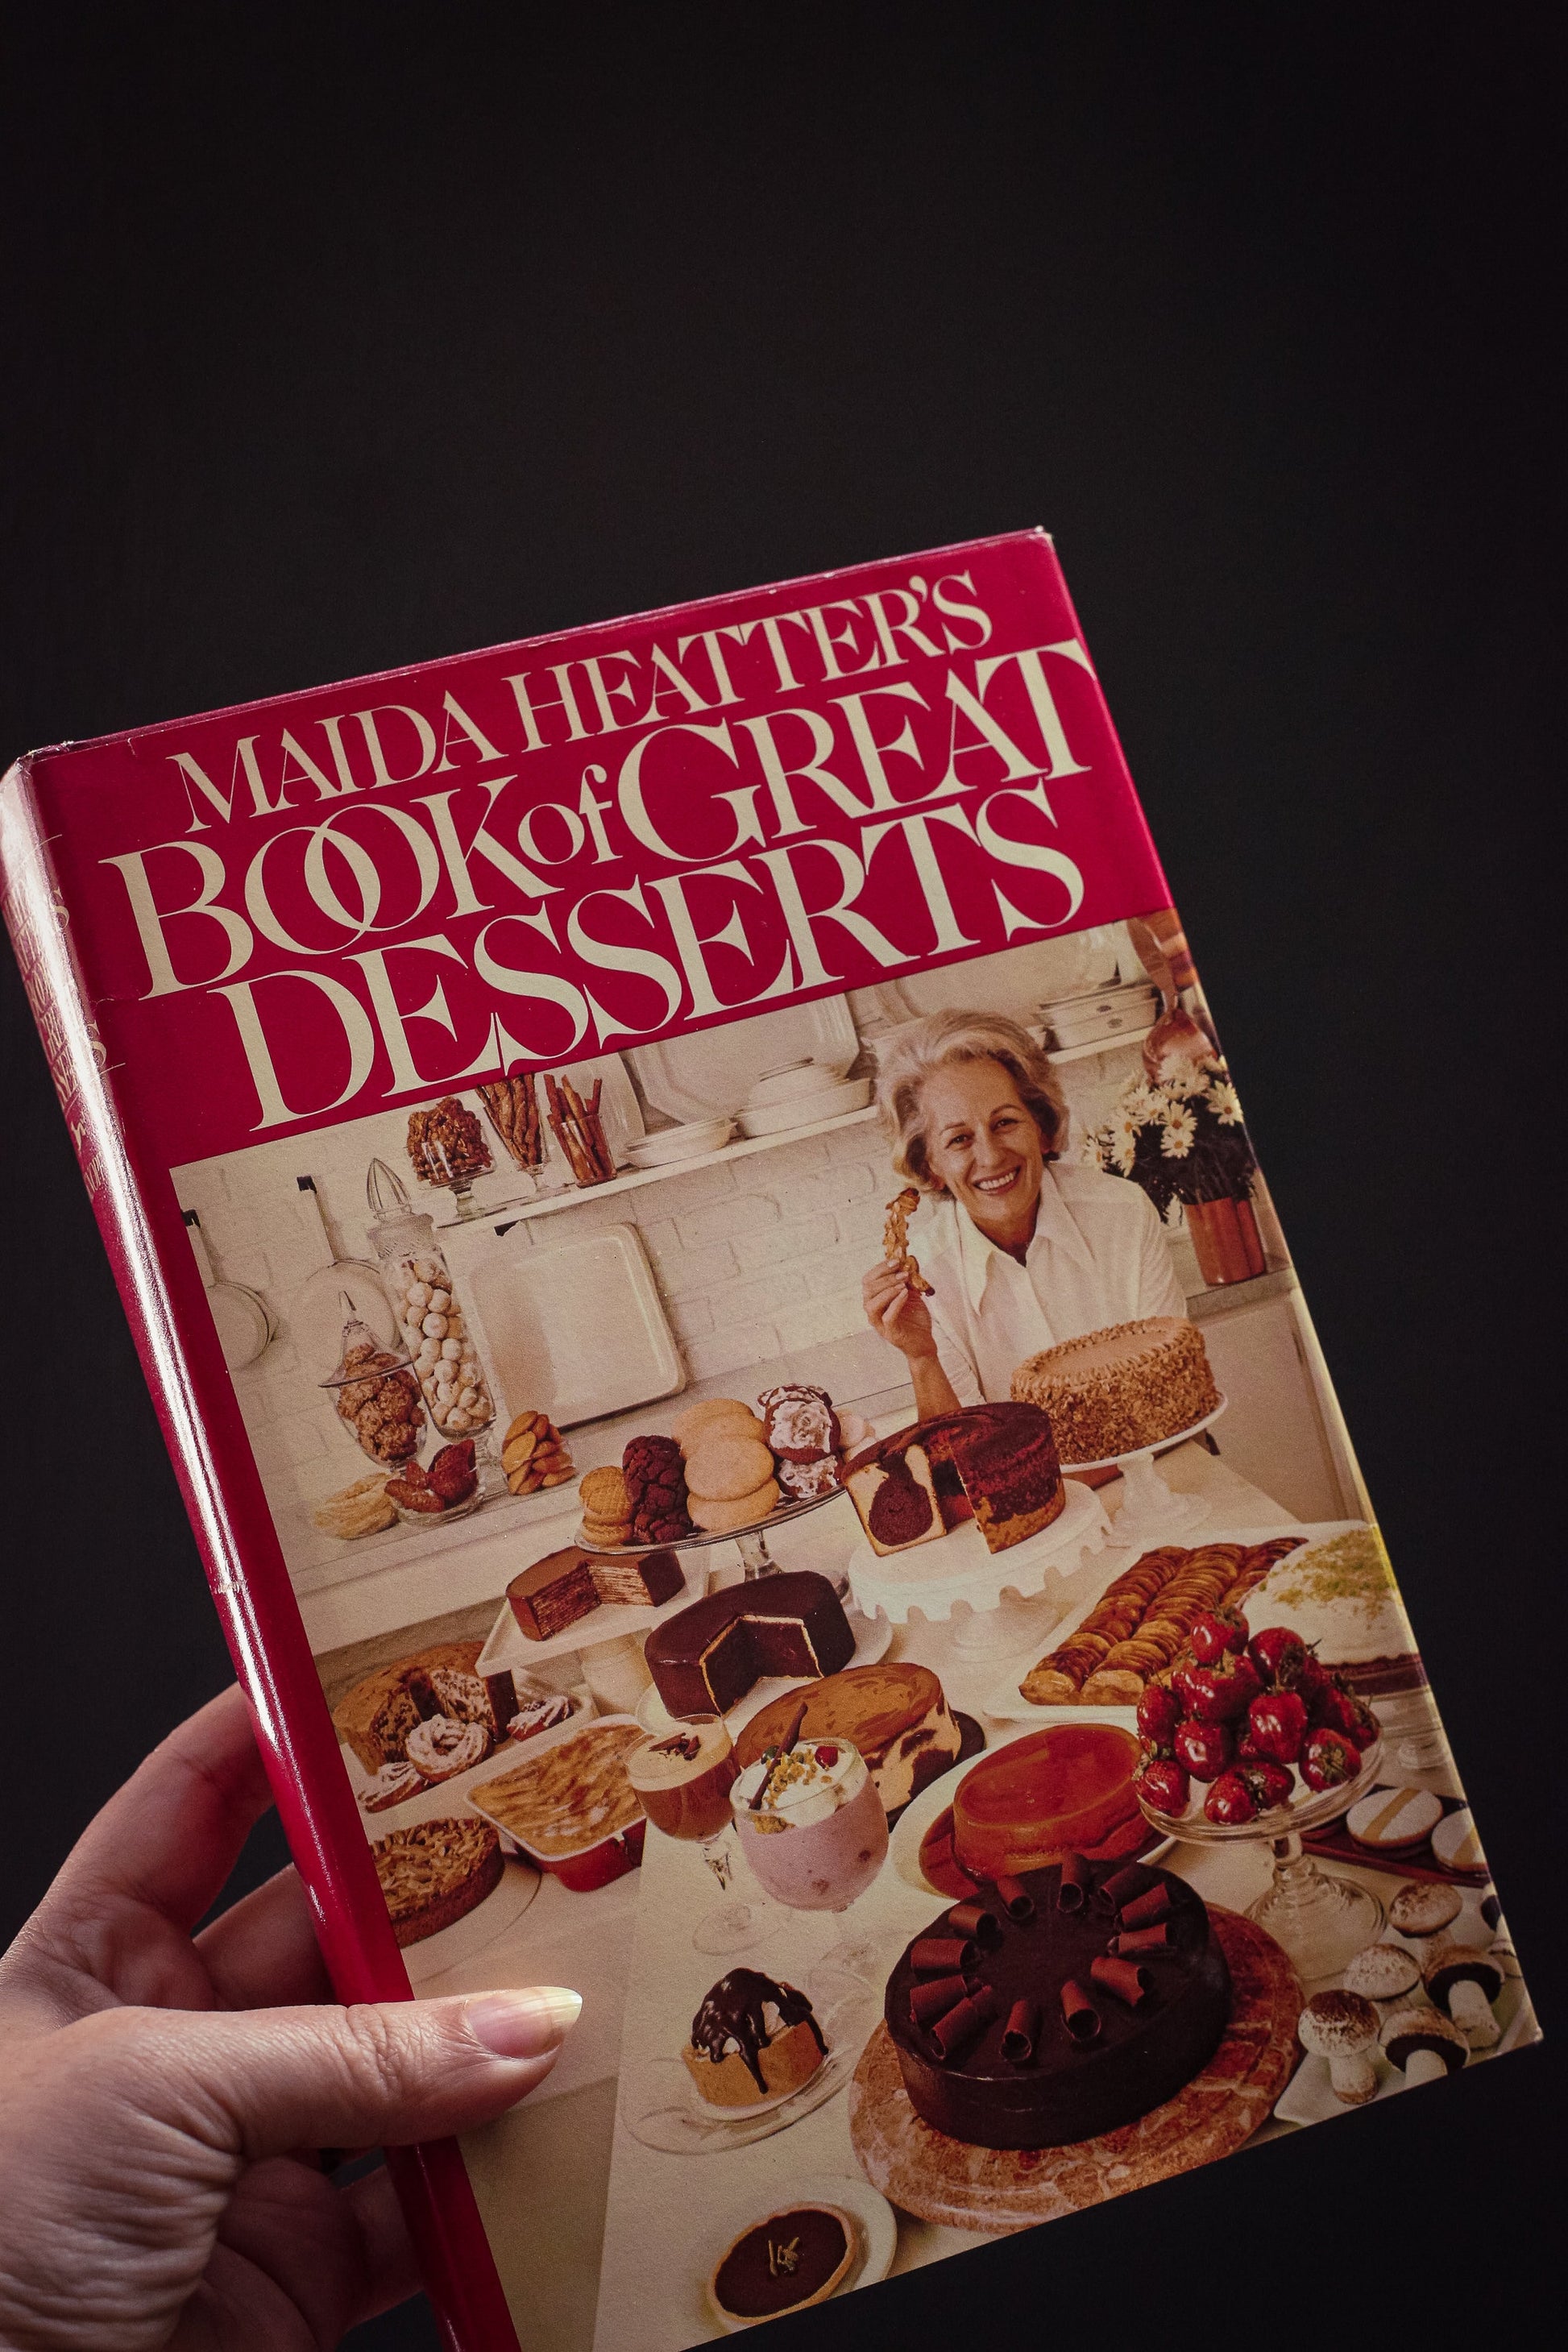 Maida Heatter's Book of Great Desserts - Vintage Hardcover Baking Book